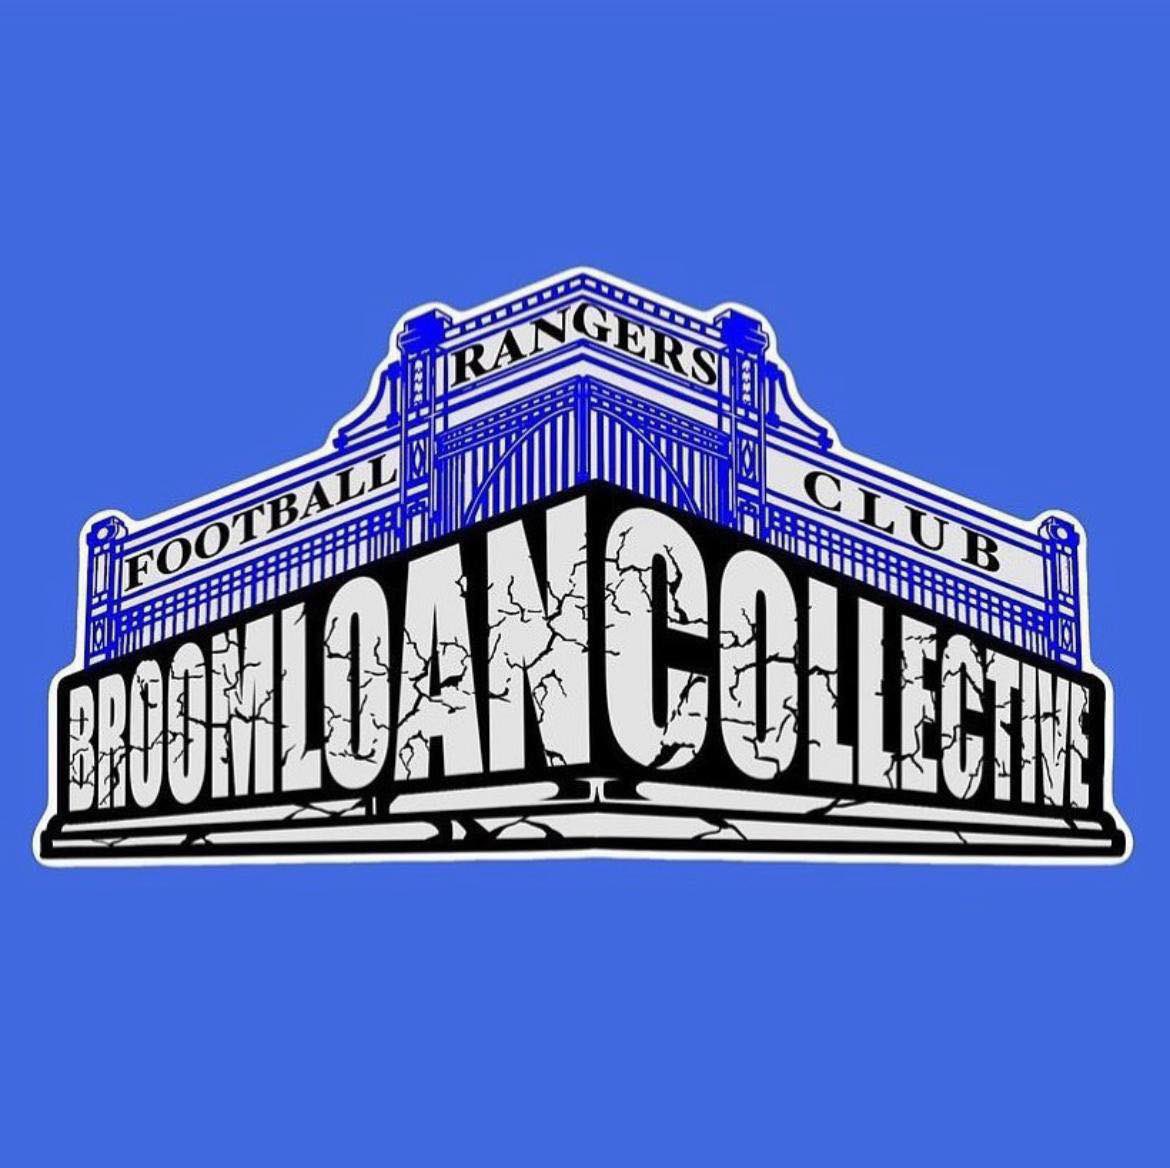 Registration and renewals for Broomloan Collective will be available at the stall located inside the Broomloan Front and Rear concourses between 2:00-2:45pm. Season 22/23 member’s scarves can also be collected for those still to do so. Ask at the stall for further details.